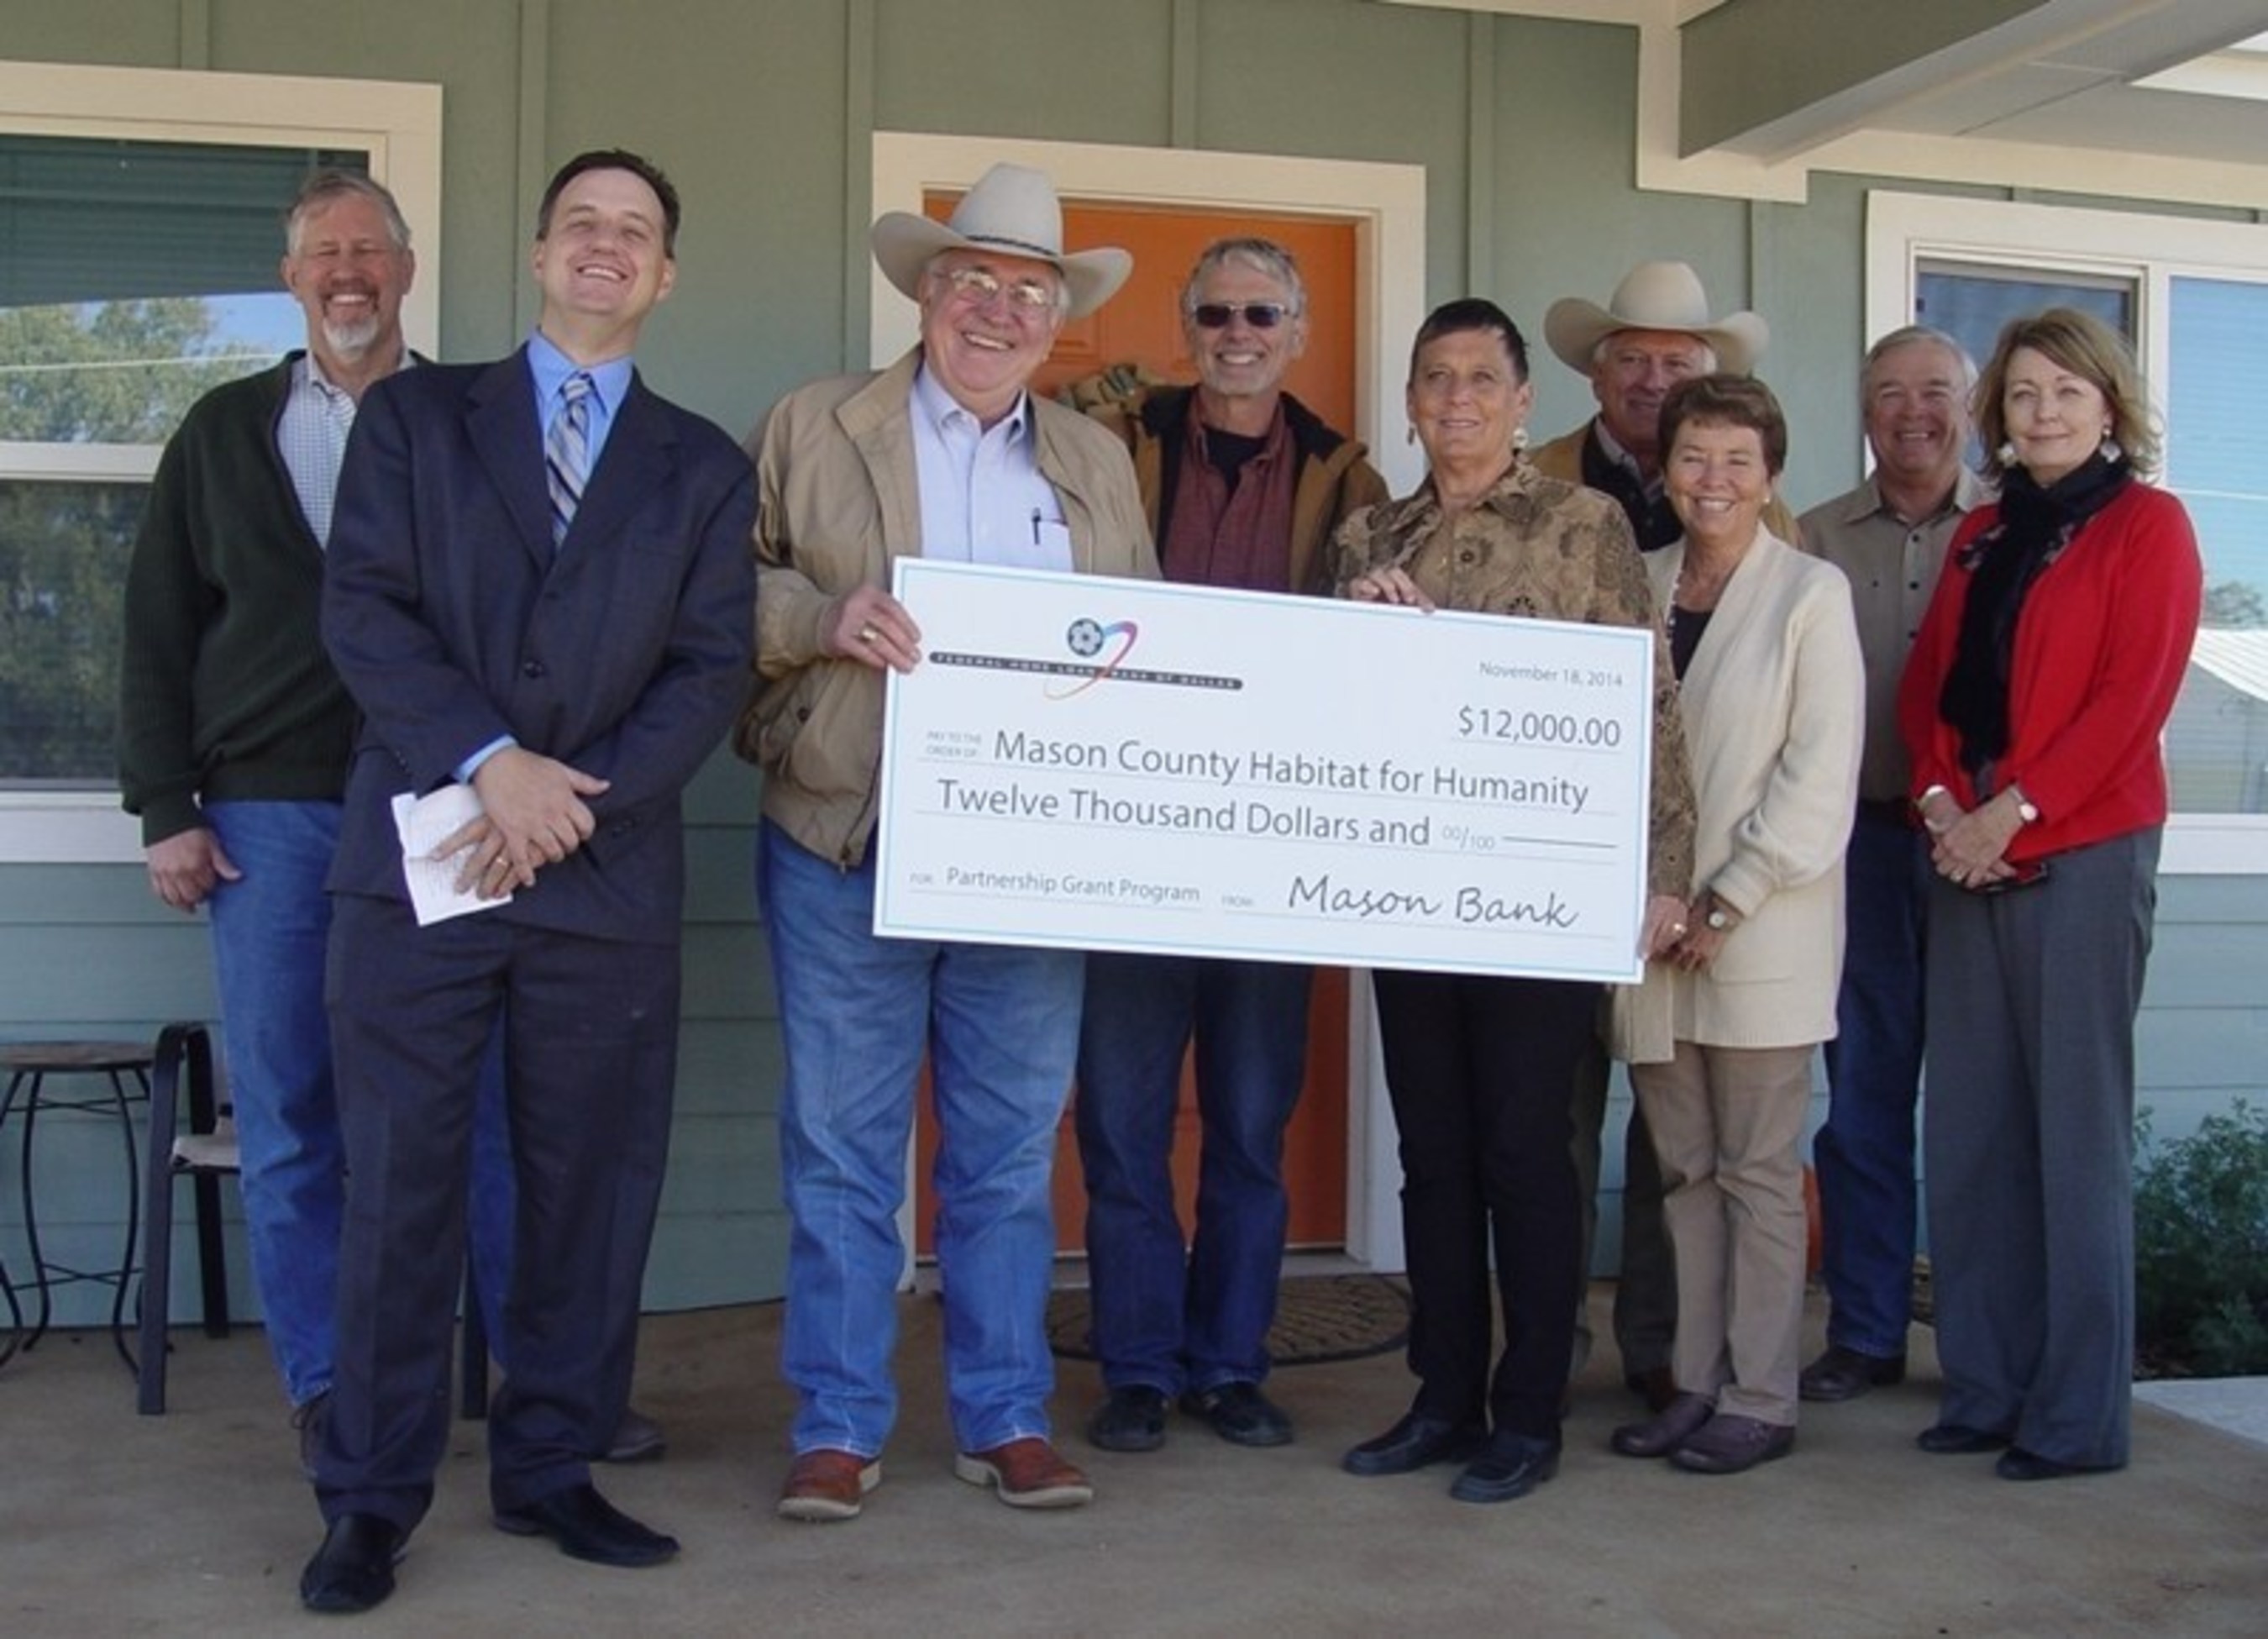 Mason County Habitat for Humanity (MCHFH) today received a $12,000 Partnership Grant Program (PGP) award from Mason Bank and the Federal Home Loan Bank of Dallas (FHLB Dallas). MCHFH will use the funds to offset operating expenses and purchase construction equipment.